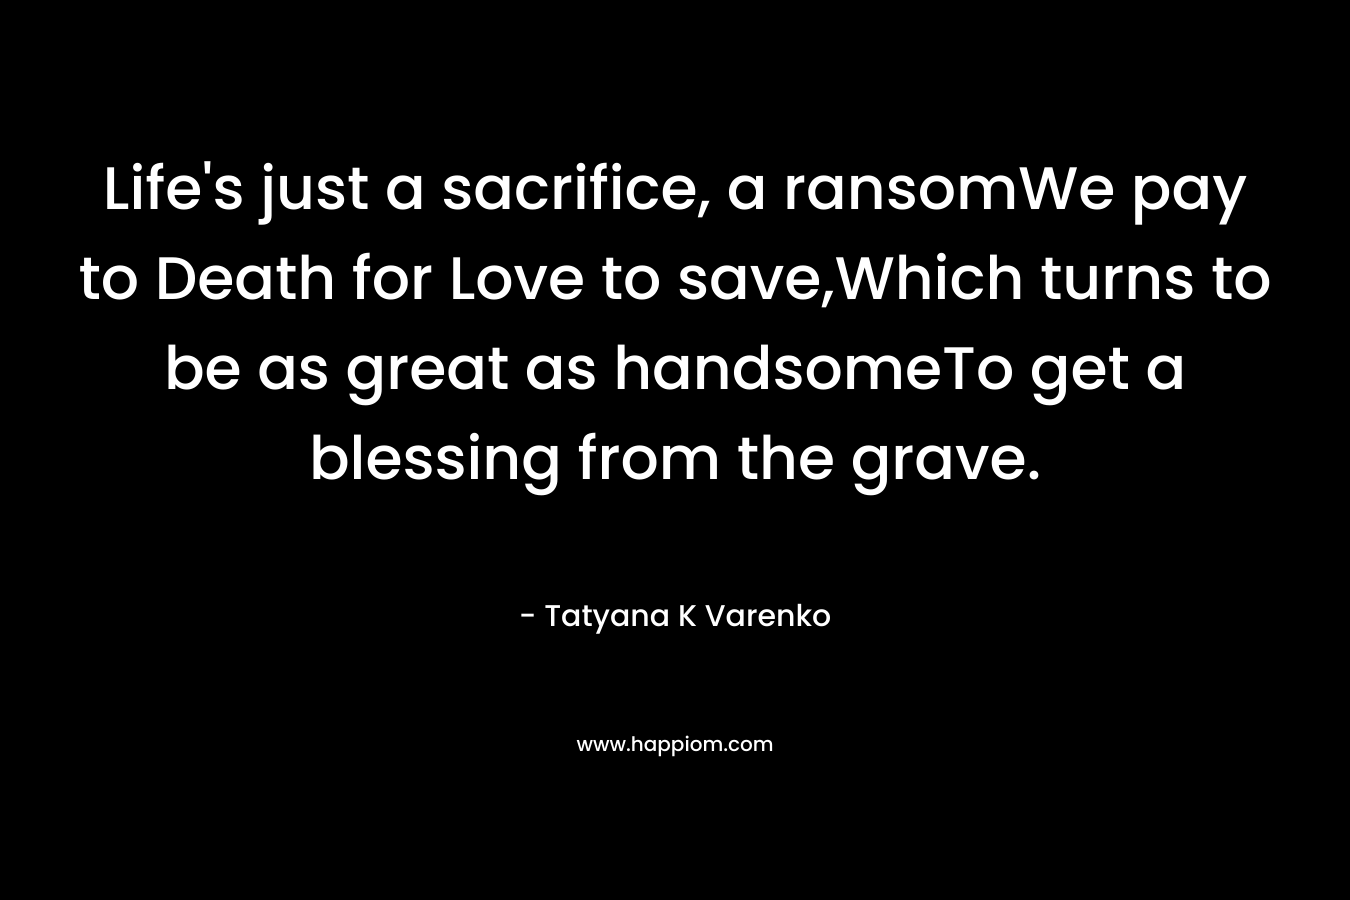 Life’s just a sacrifice, a ransomWe pay to Death for Love to save,Which turns to be as great as handsomeTo get a blessing from the grave. – Tatyana K Varenko